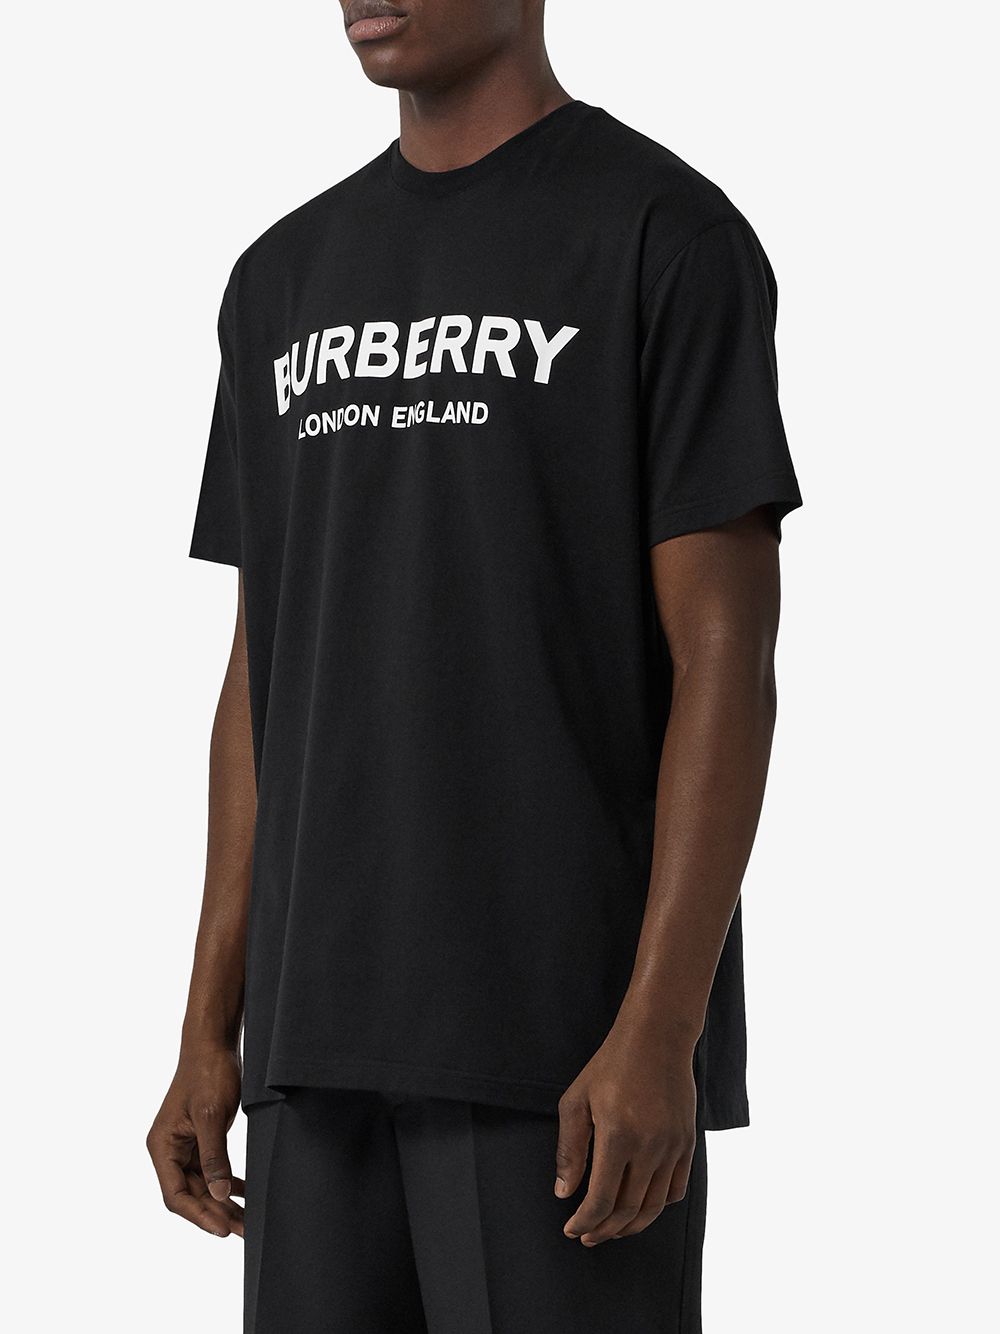 Shop Burberry logo print T-shirt with Express Delivery - FARFETCH